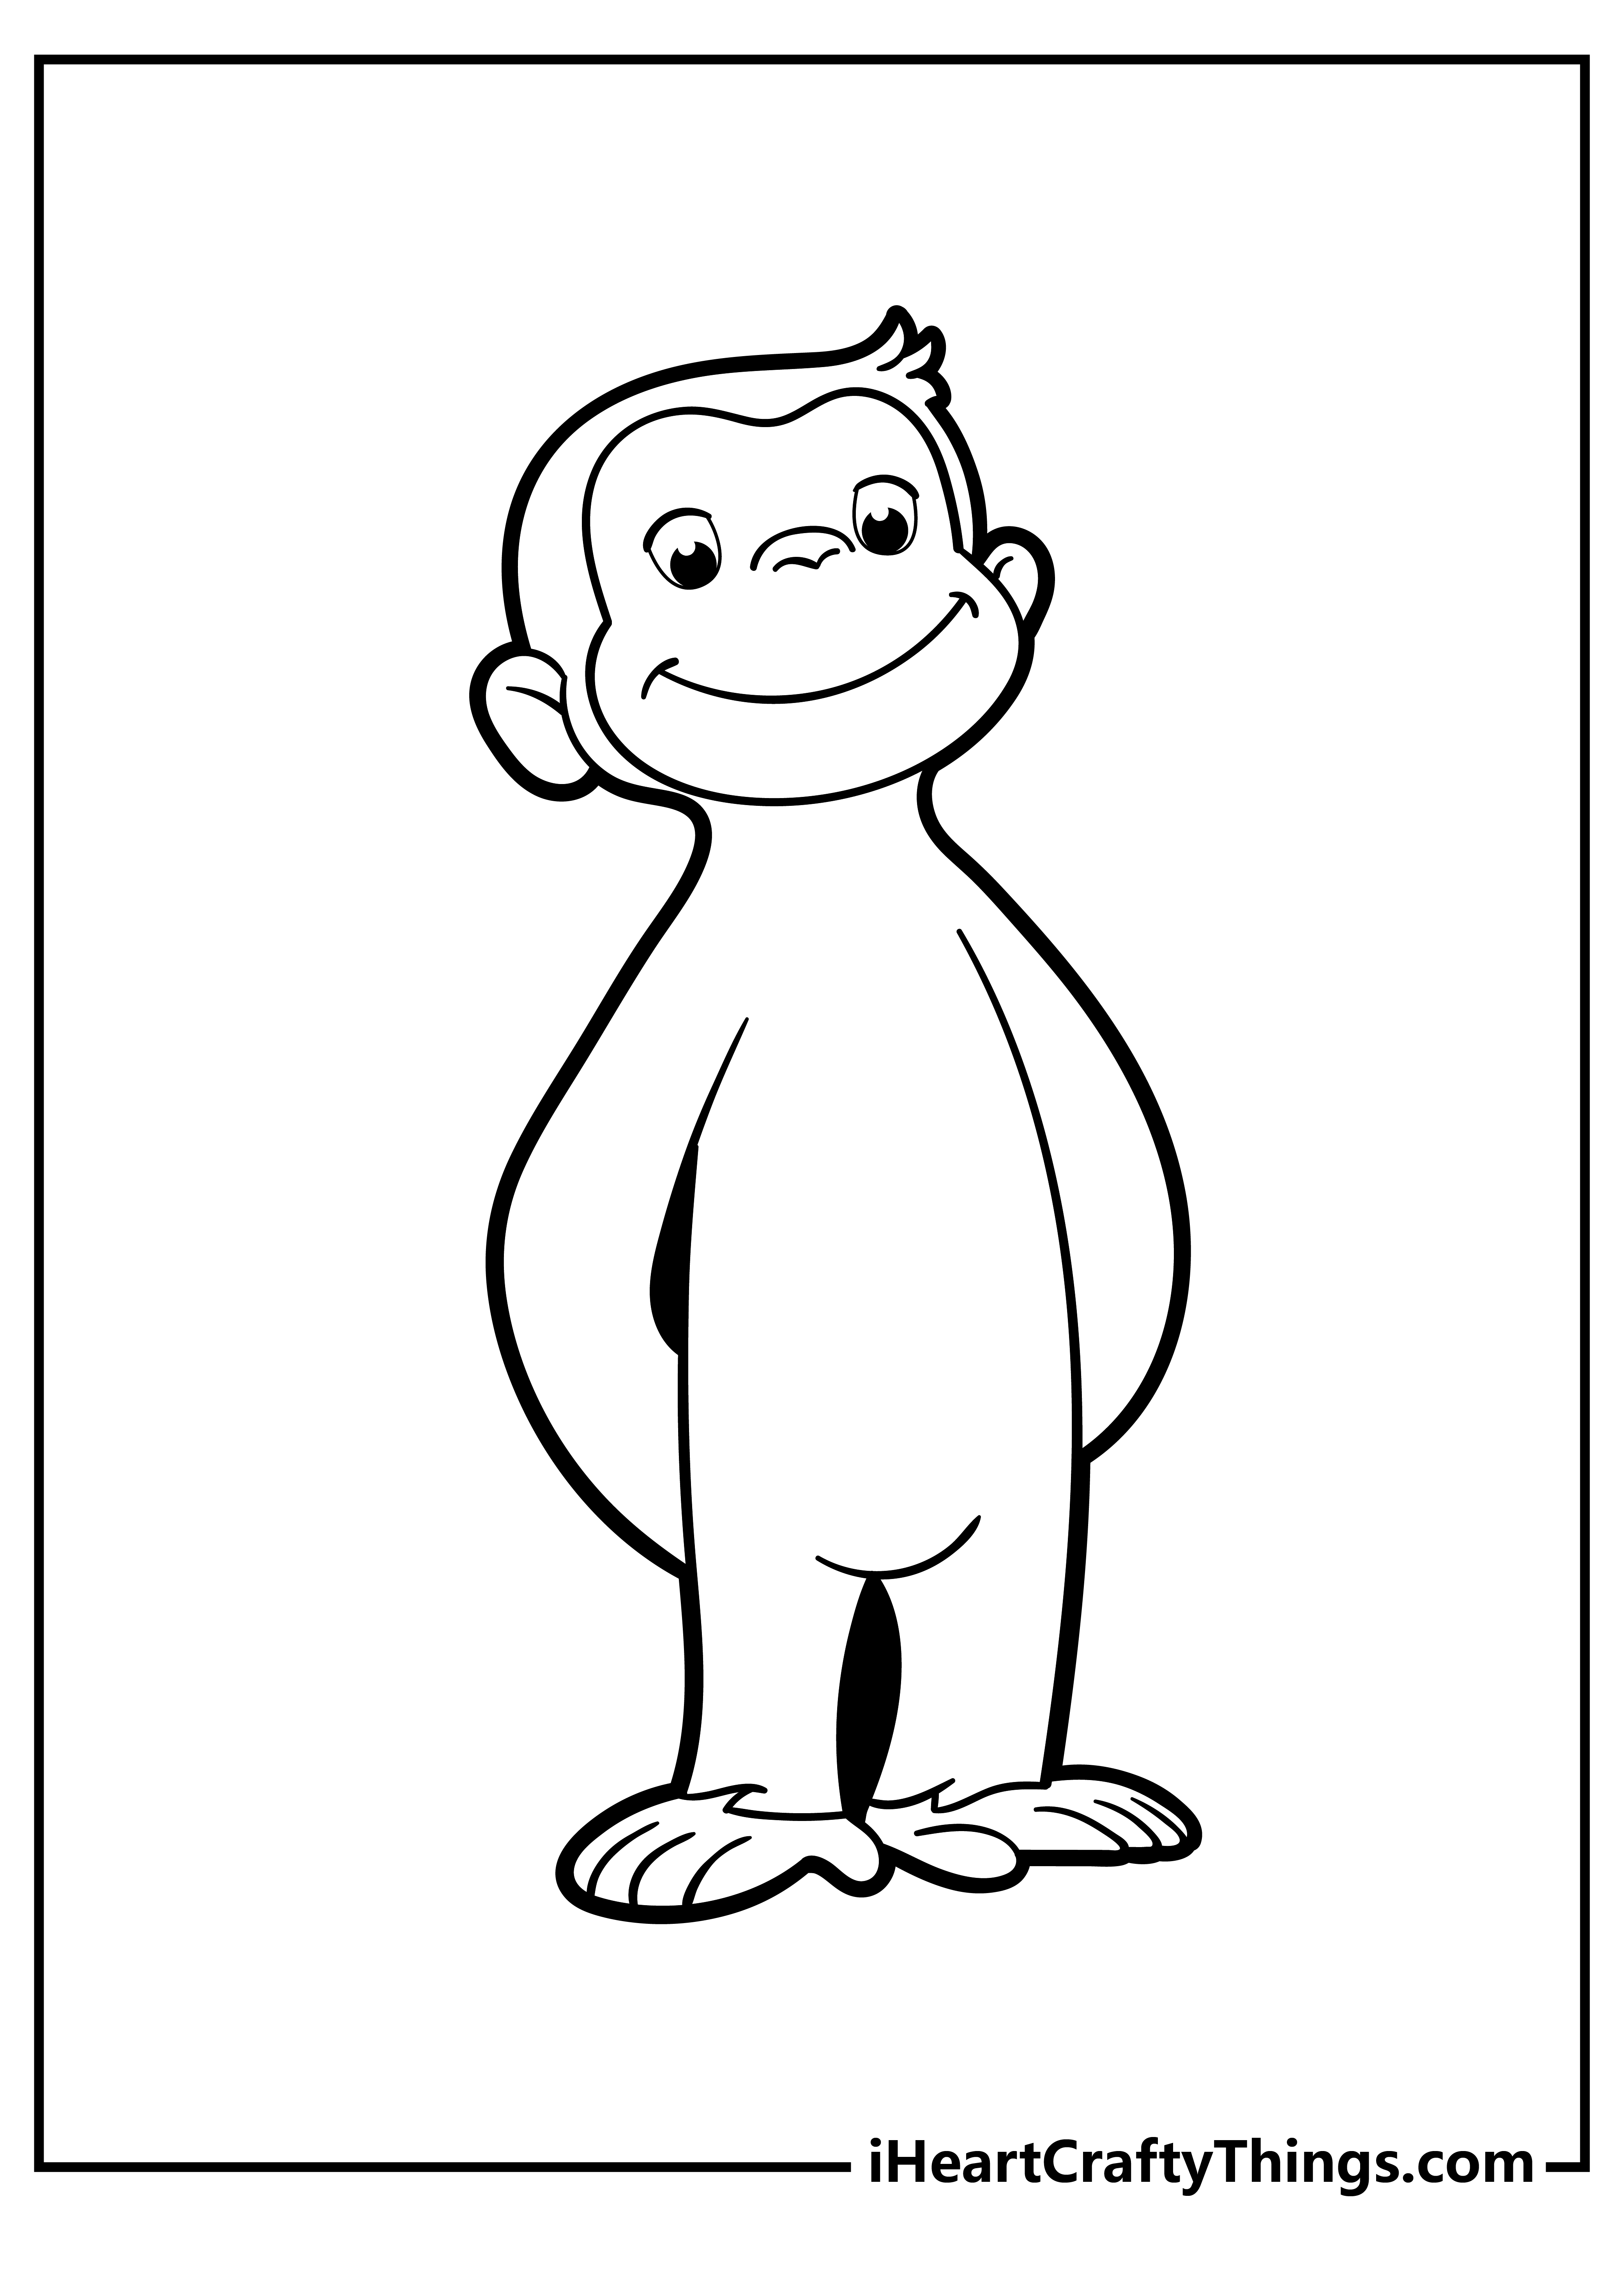 Curious George Coloring Pages free pdf download